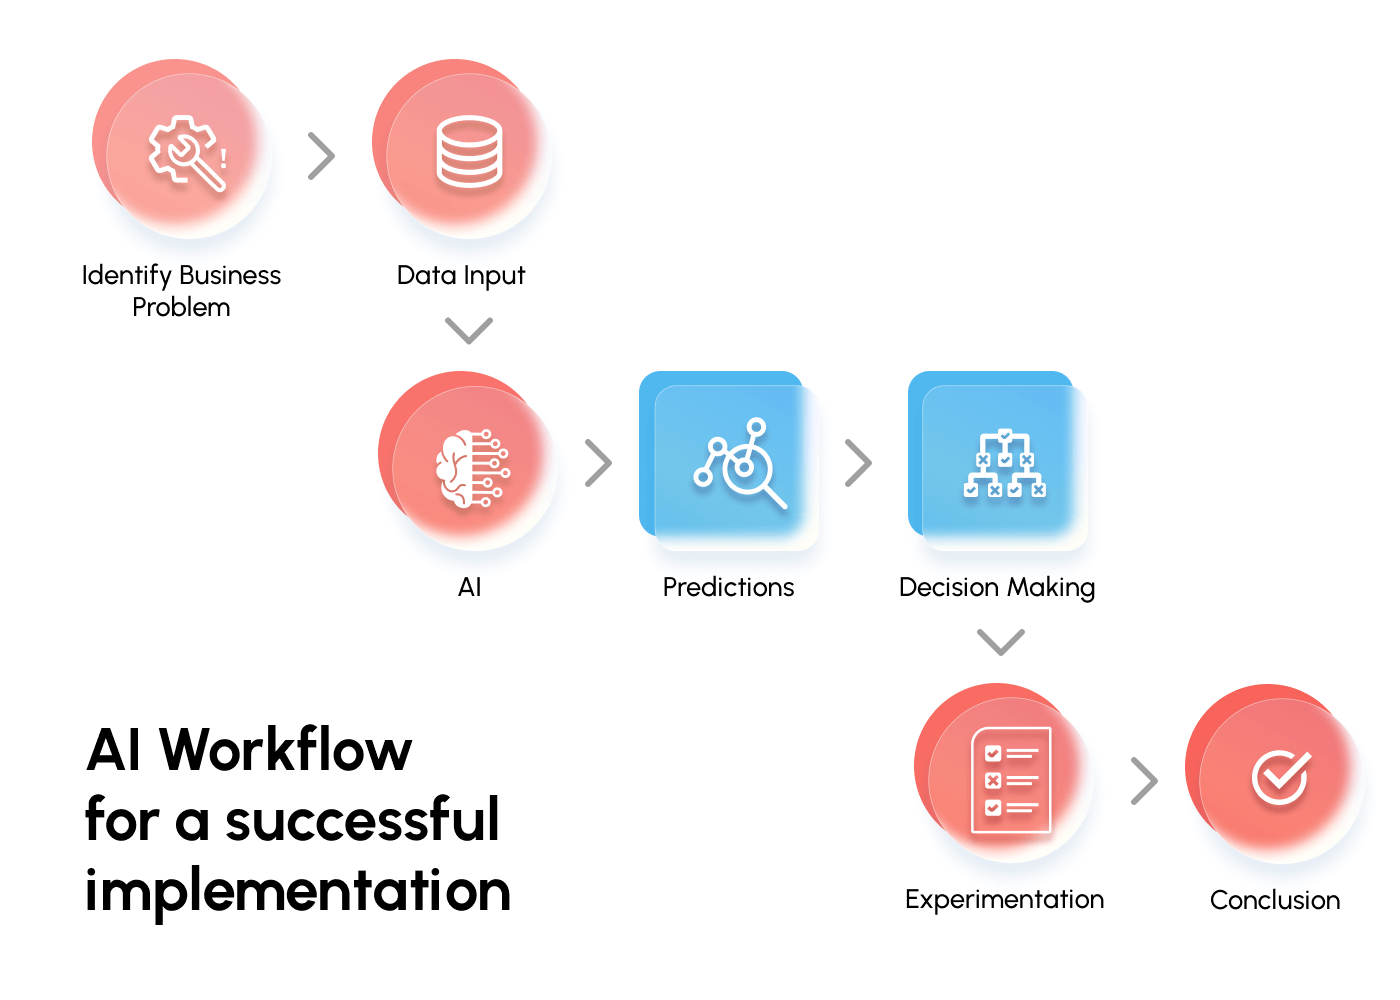 Here’s what a typical AI workflow would look like